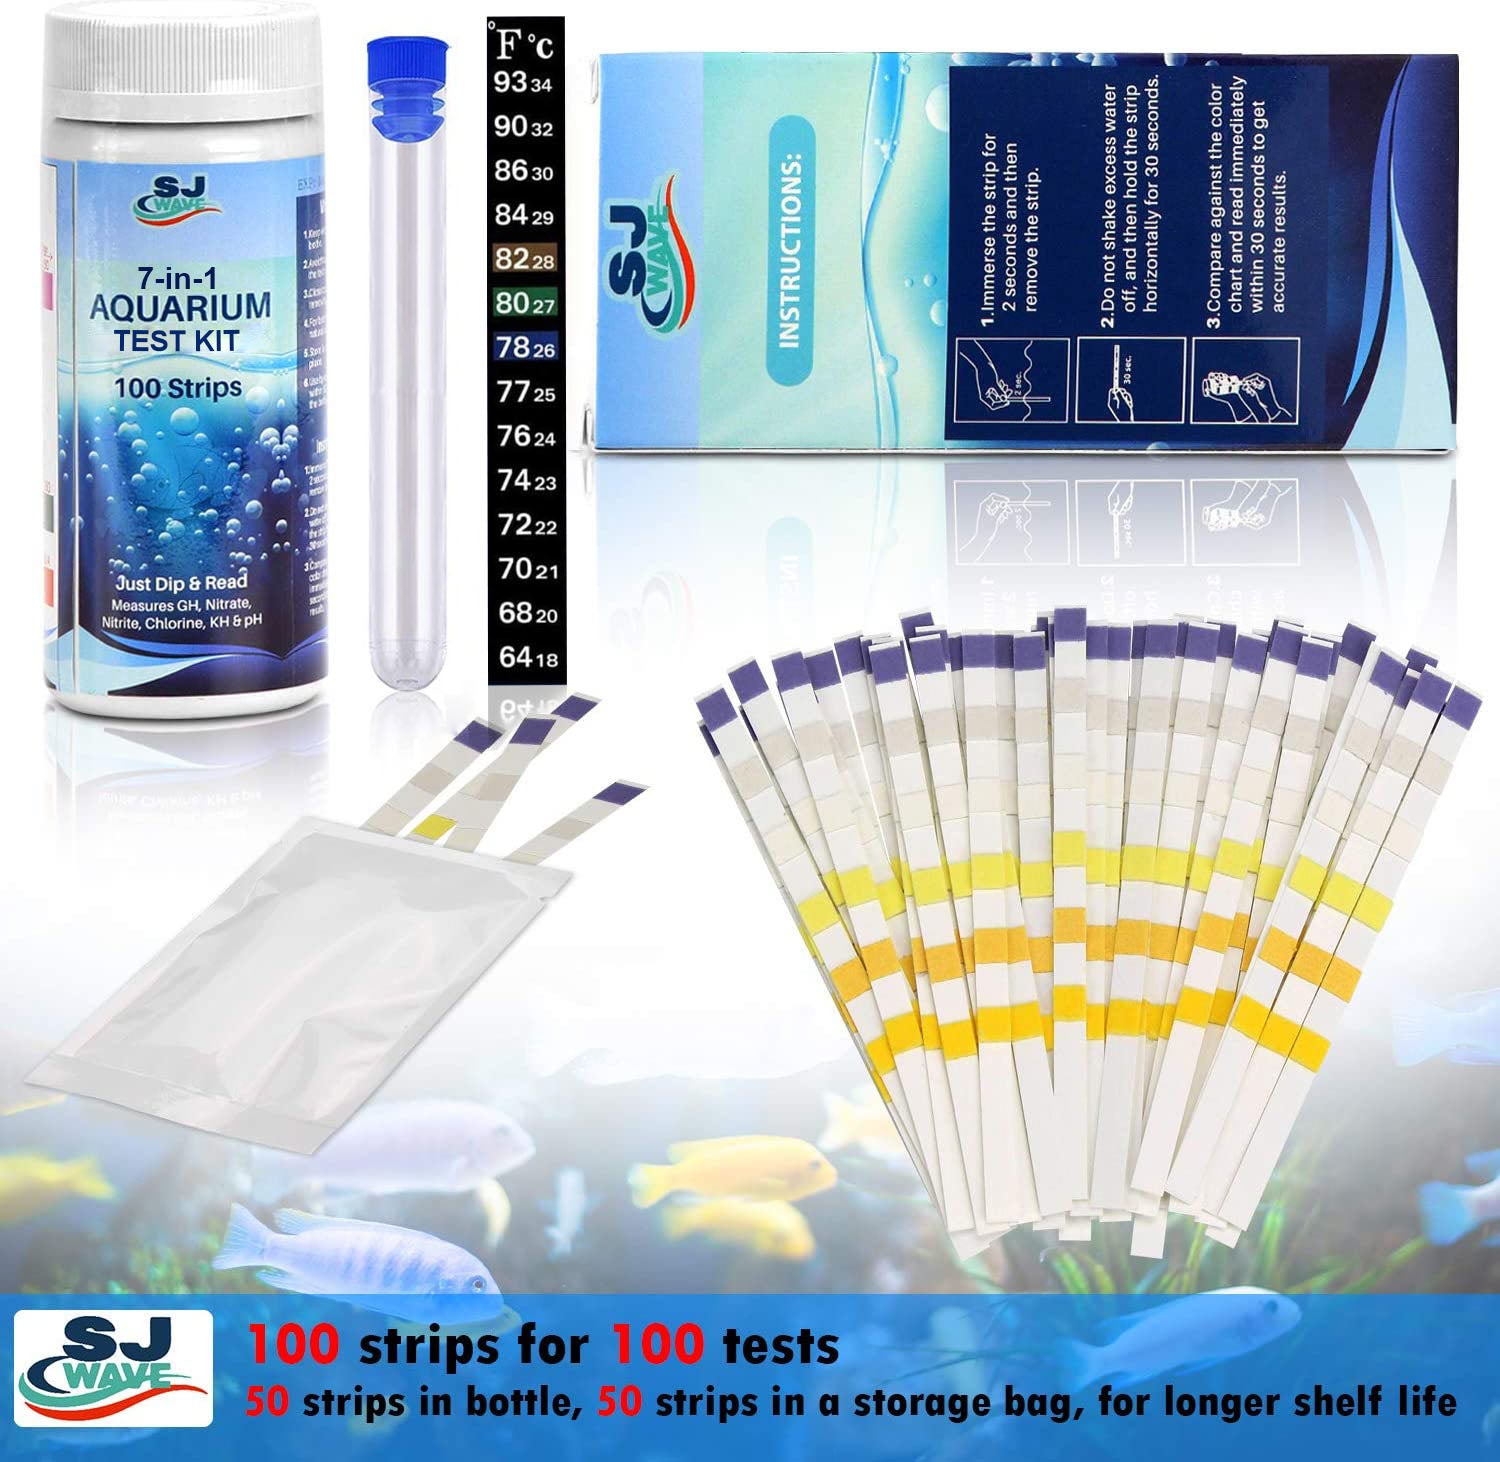 7 in 1 Aquarium Test Kit with Thermometer – SJ Wave